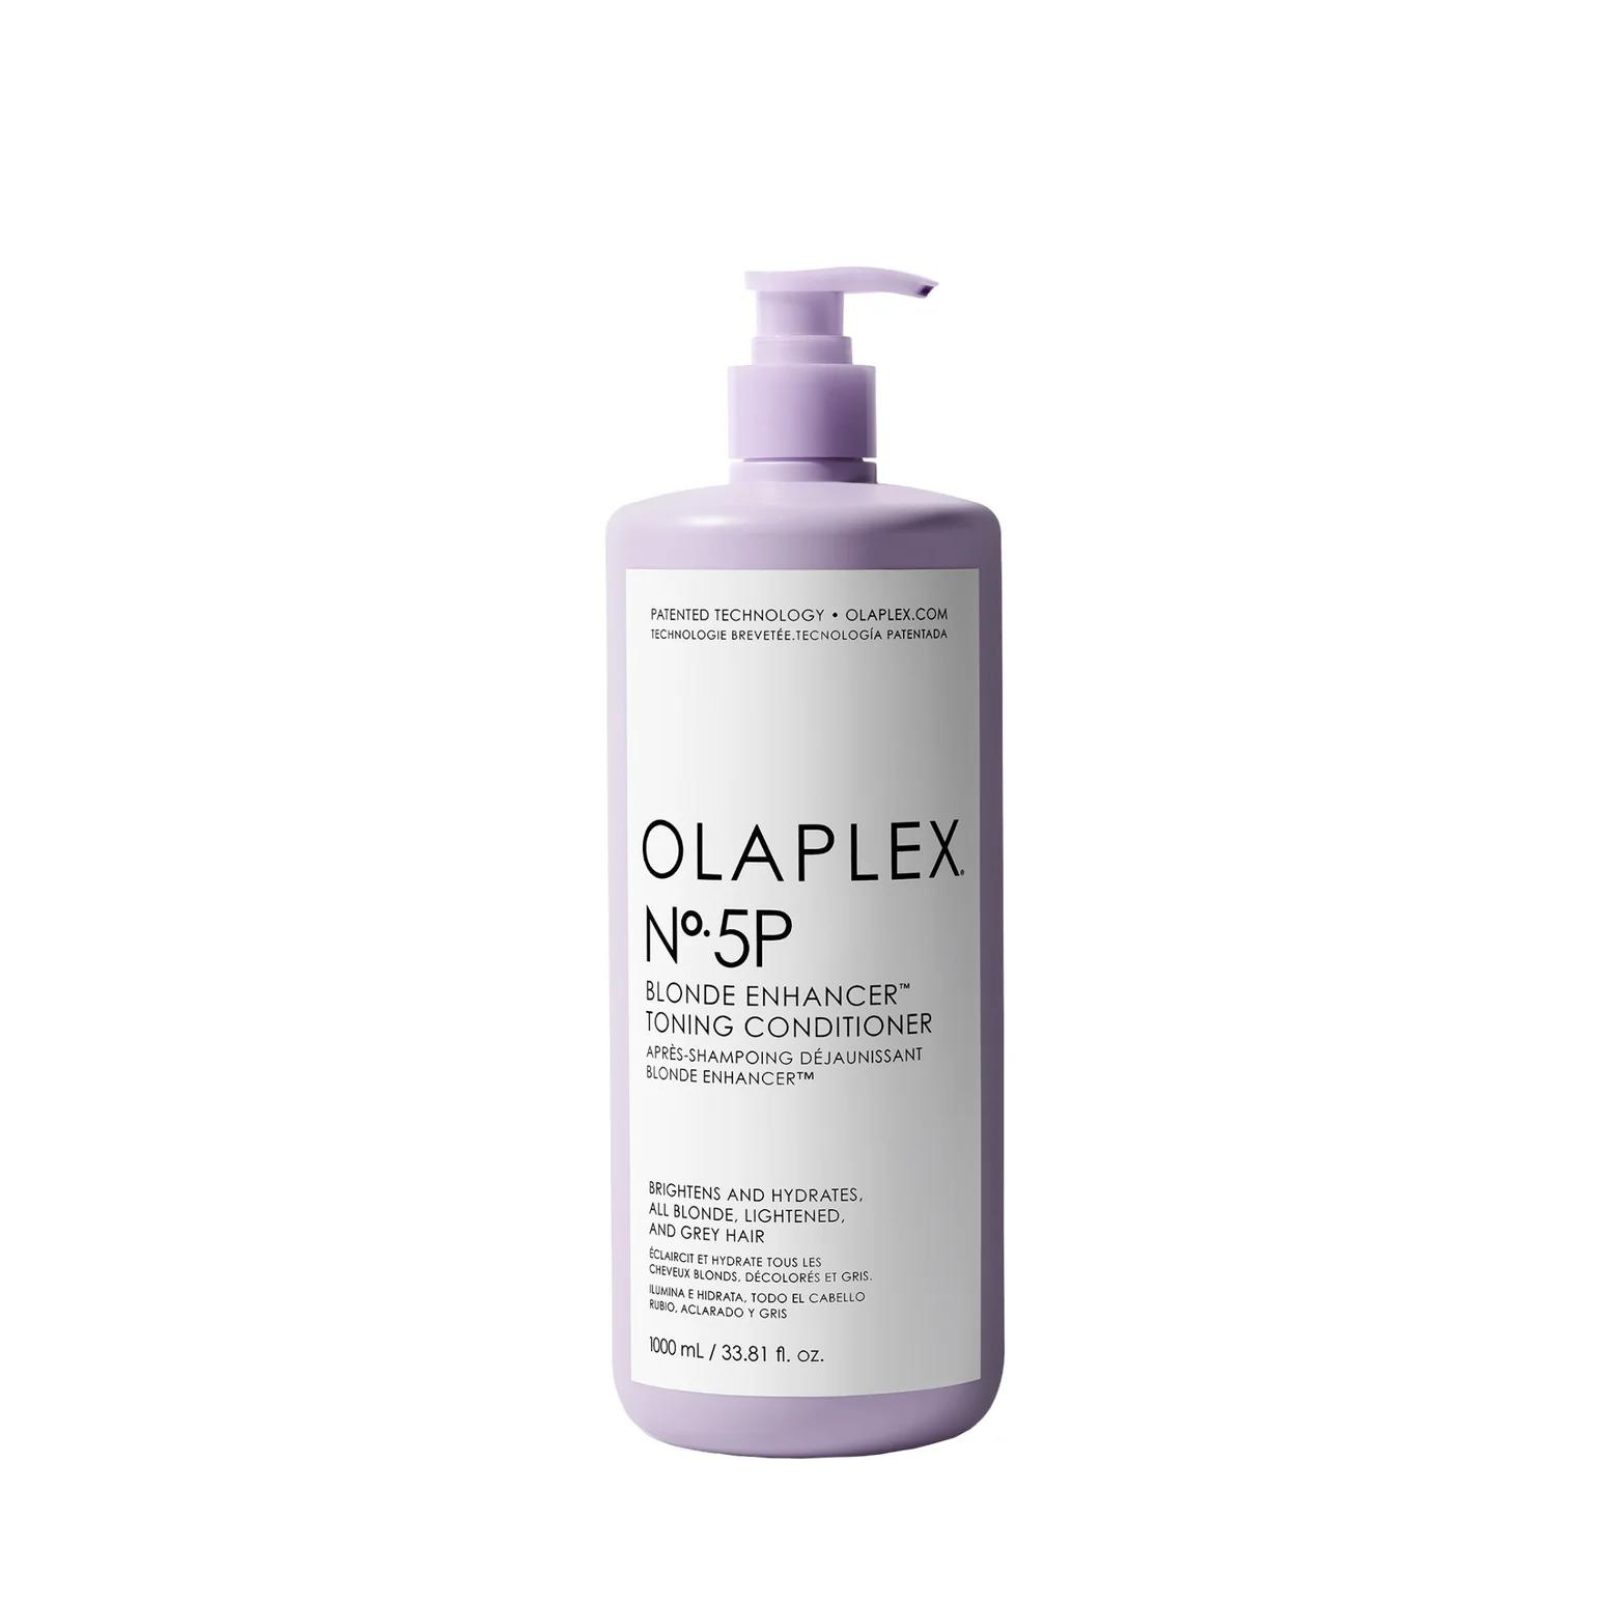 Toning conditioner for blondes by Olaplex (Olaplex Nº.5P Blonde Enhancer™ Toning Conditioner)